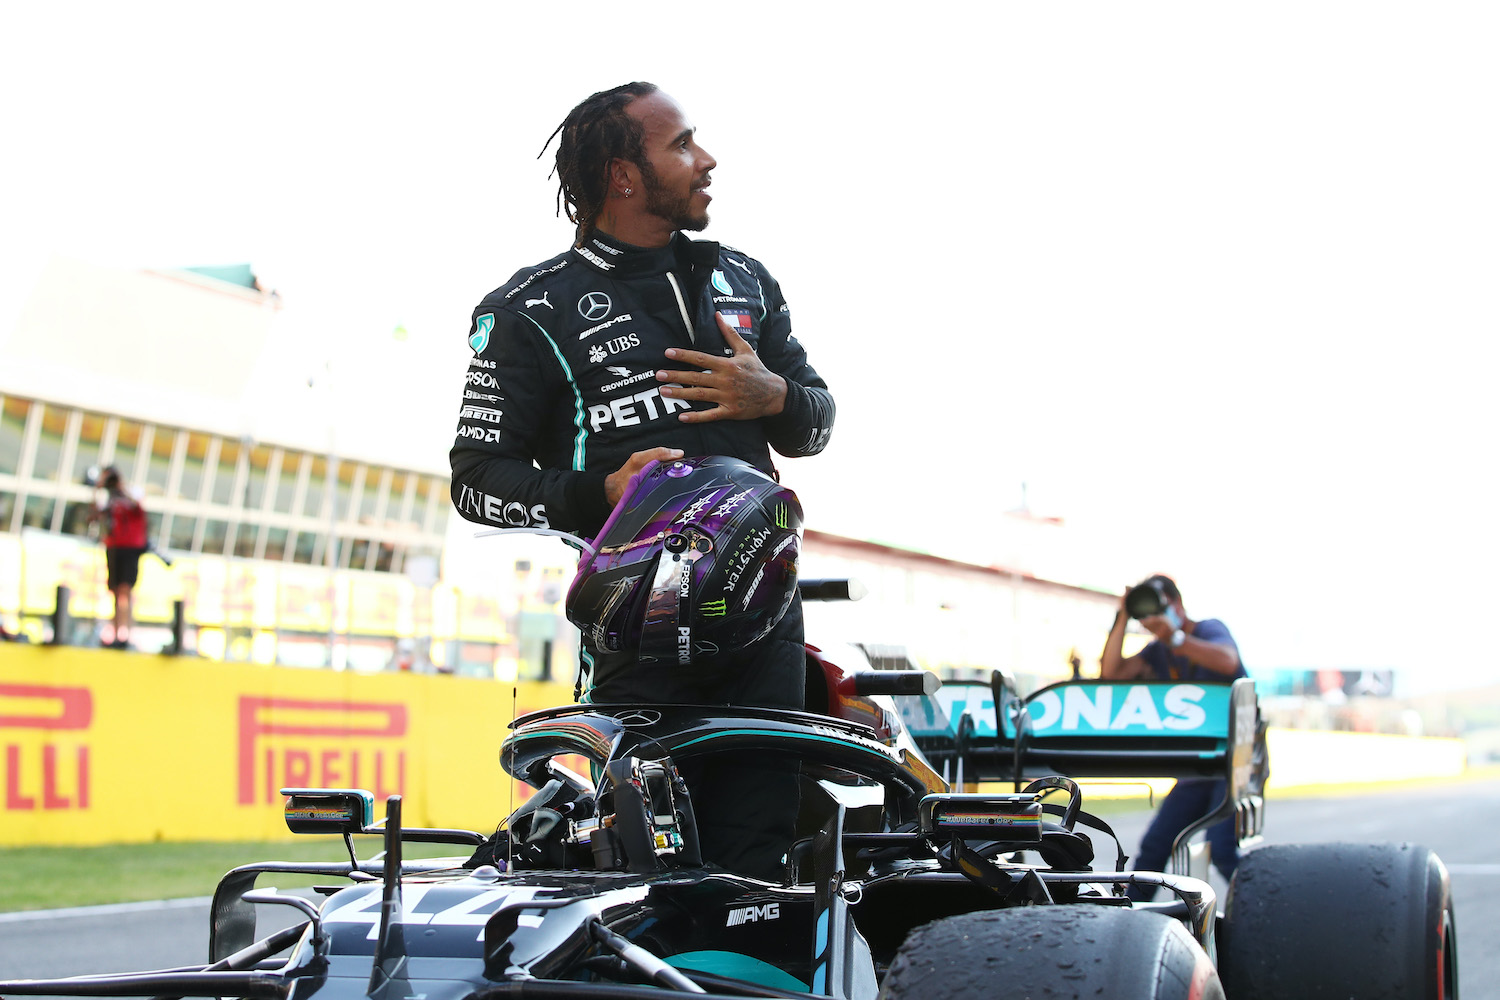 Lewis Hamilton Believes It’s Past Time for Better Tires for F1 Racing